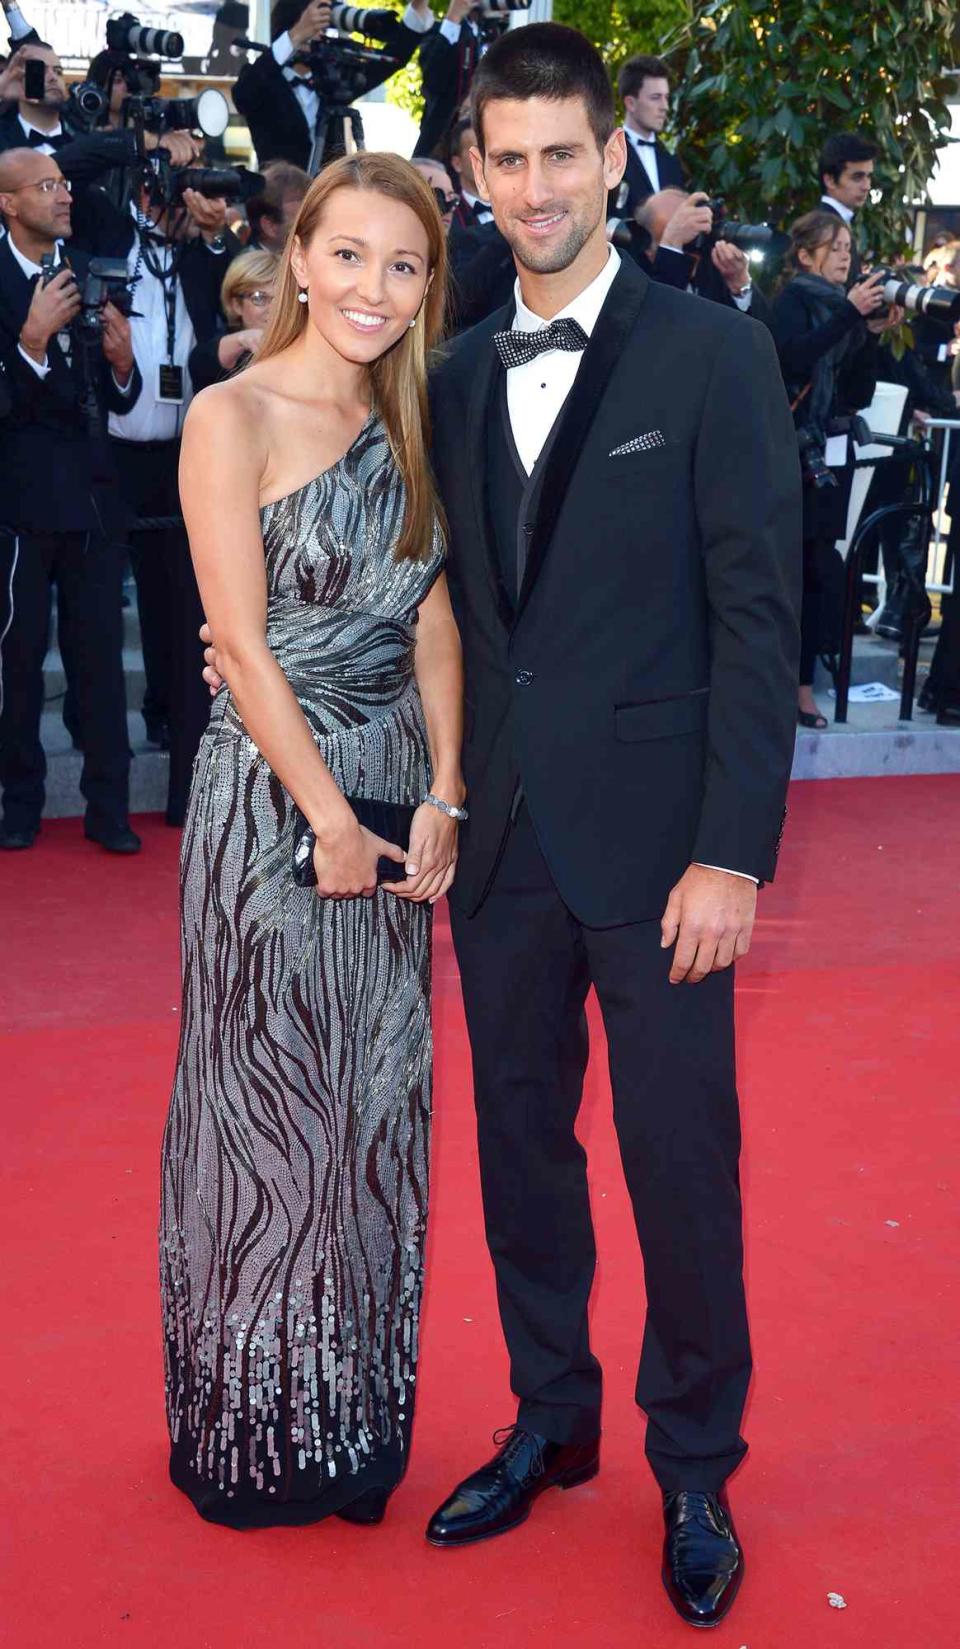 Jelena Ristic and tennis player Novak Djokovic attend the "Killing Them Softly" Premiere during the 65th Annual Cannes Film Festival at Palais des Festivals on May 22, 2012 in Cannes, France